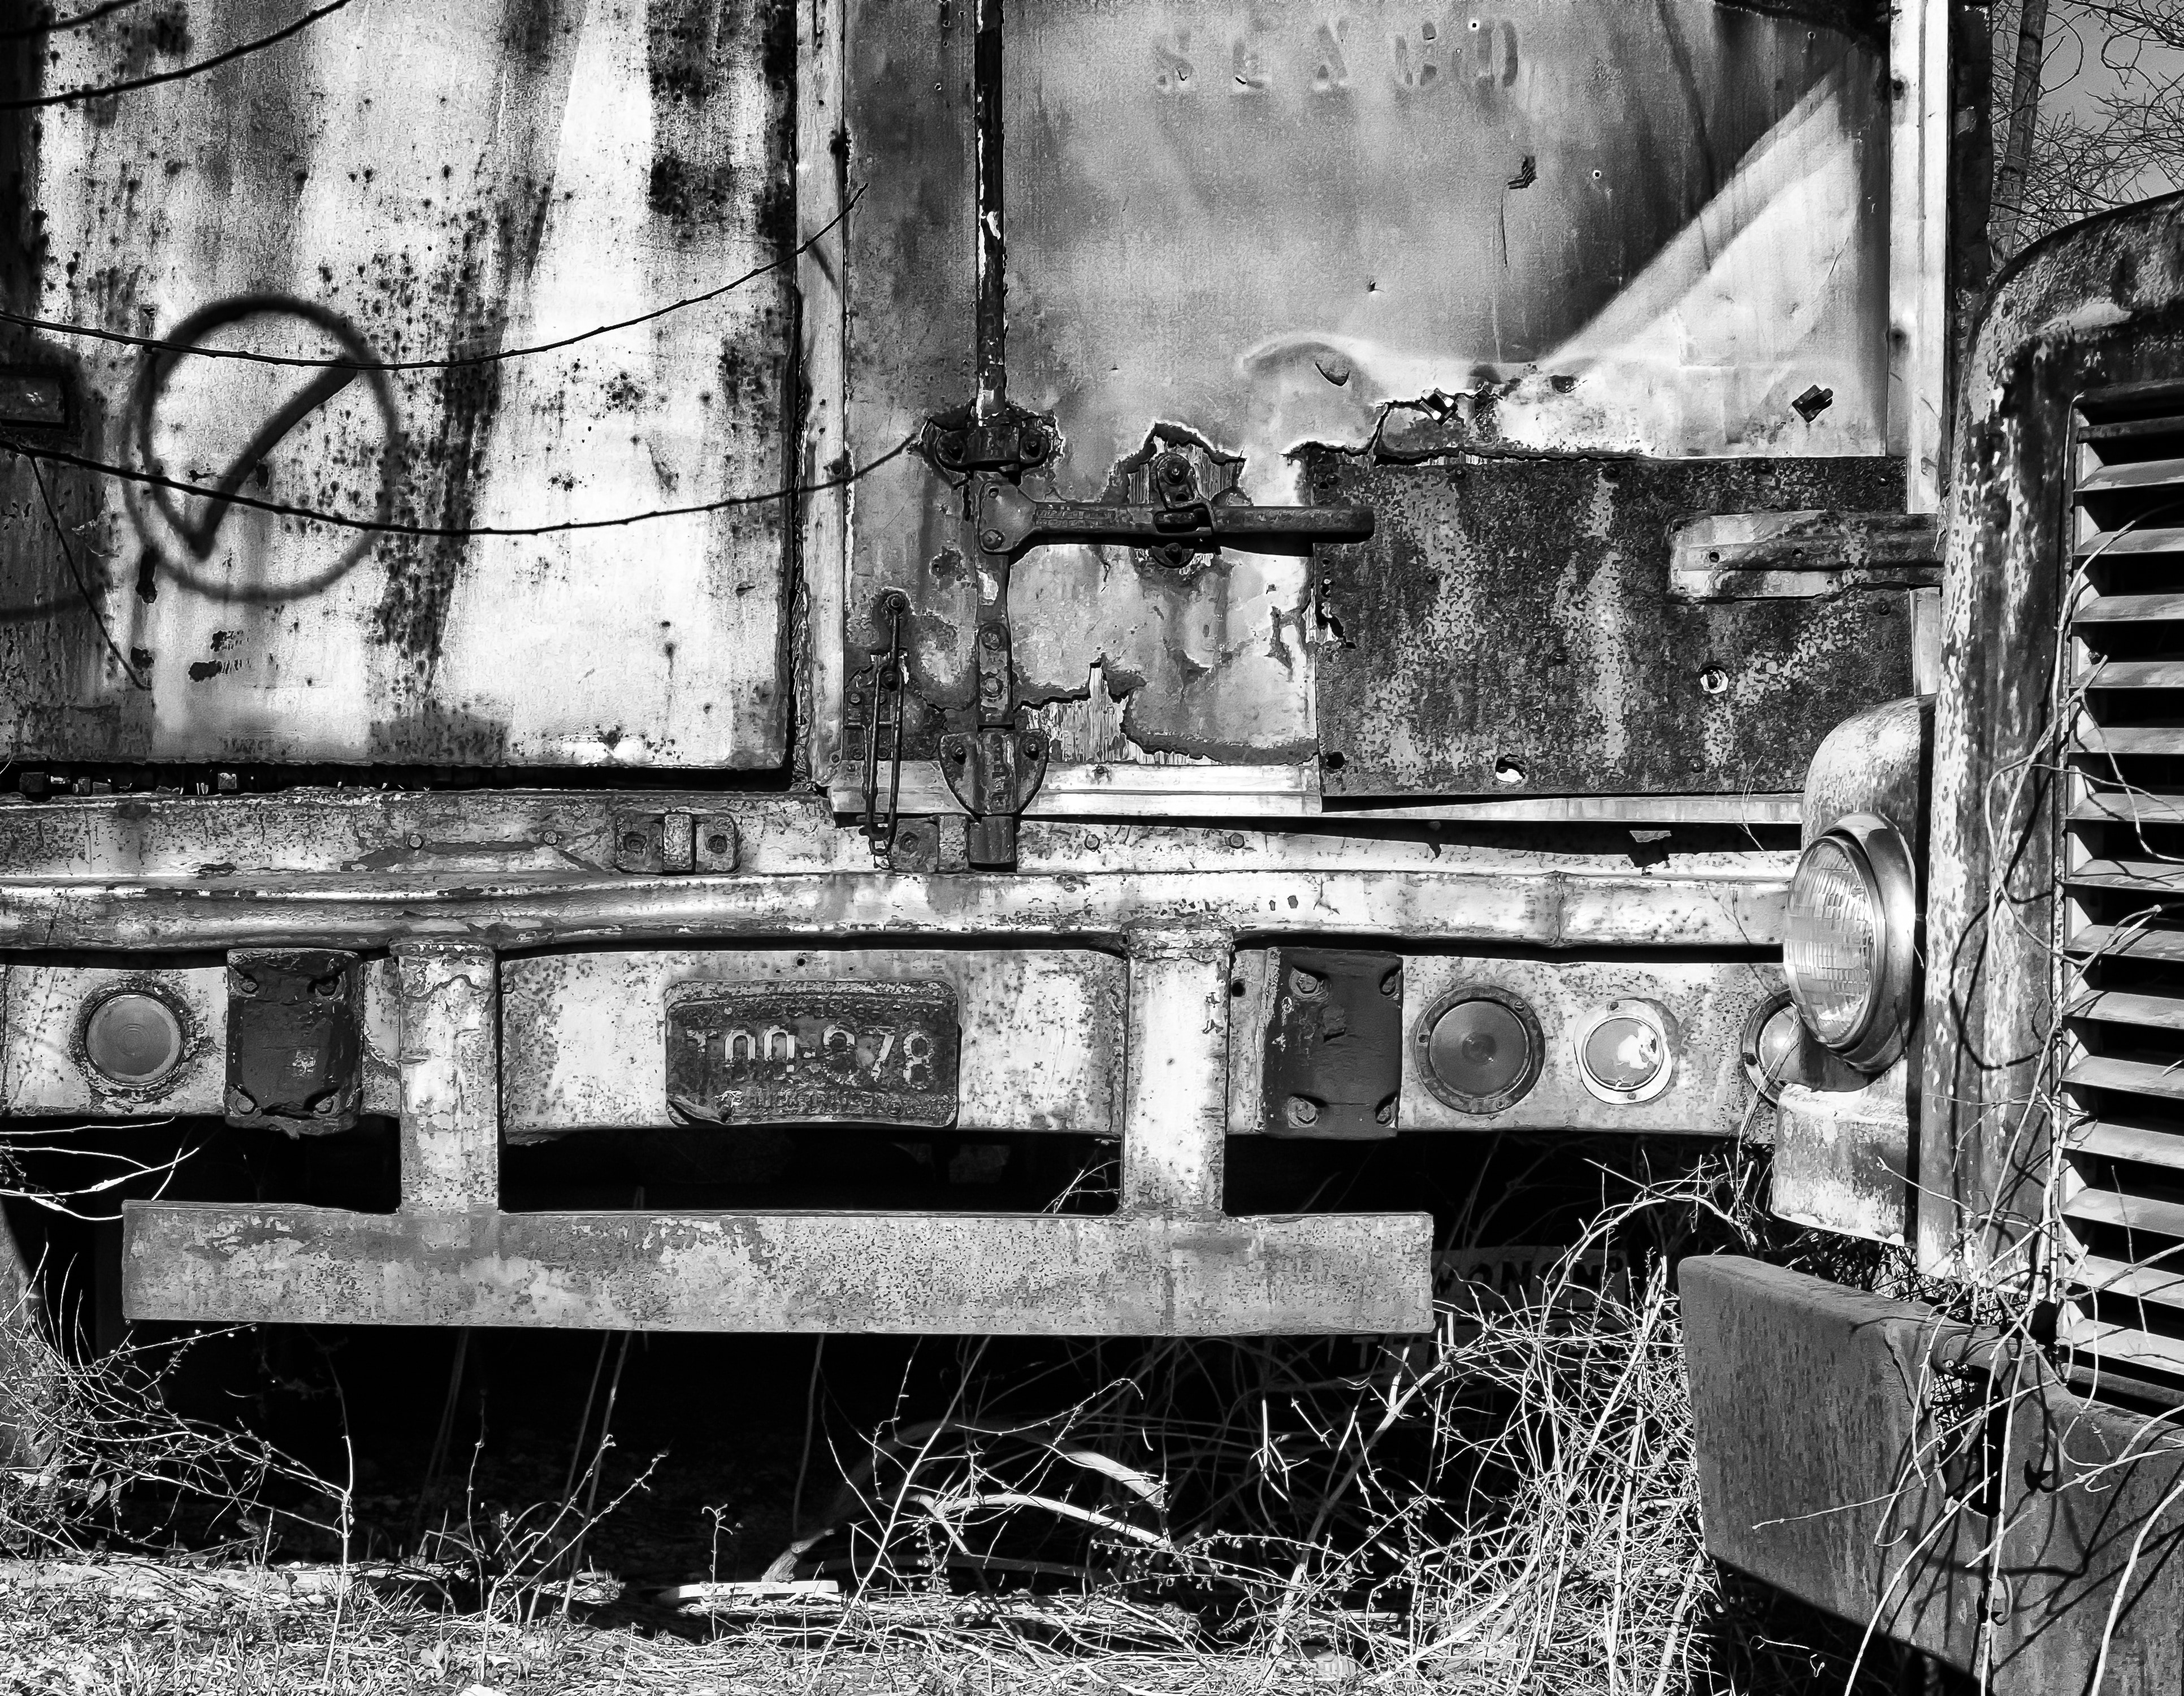 gray scale photo of utility trailer